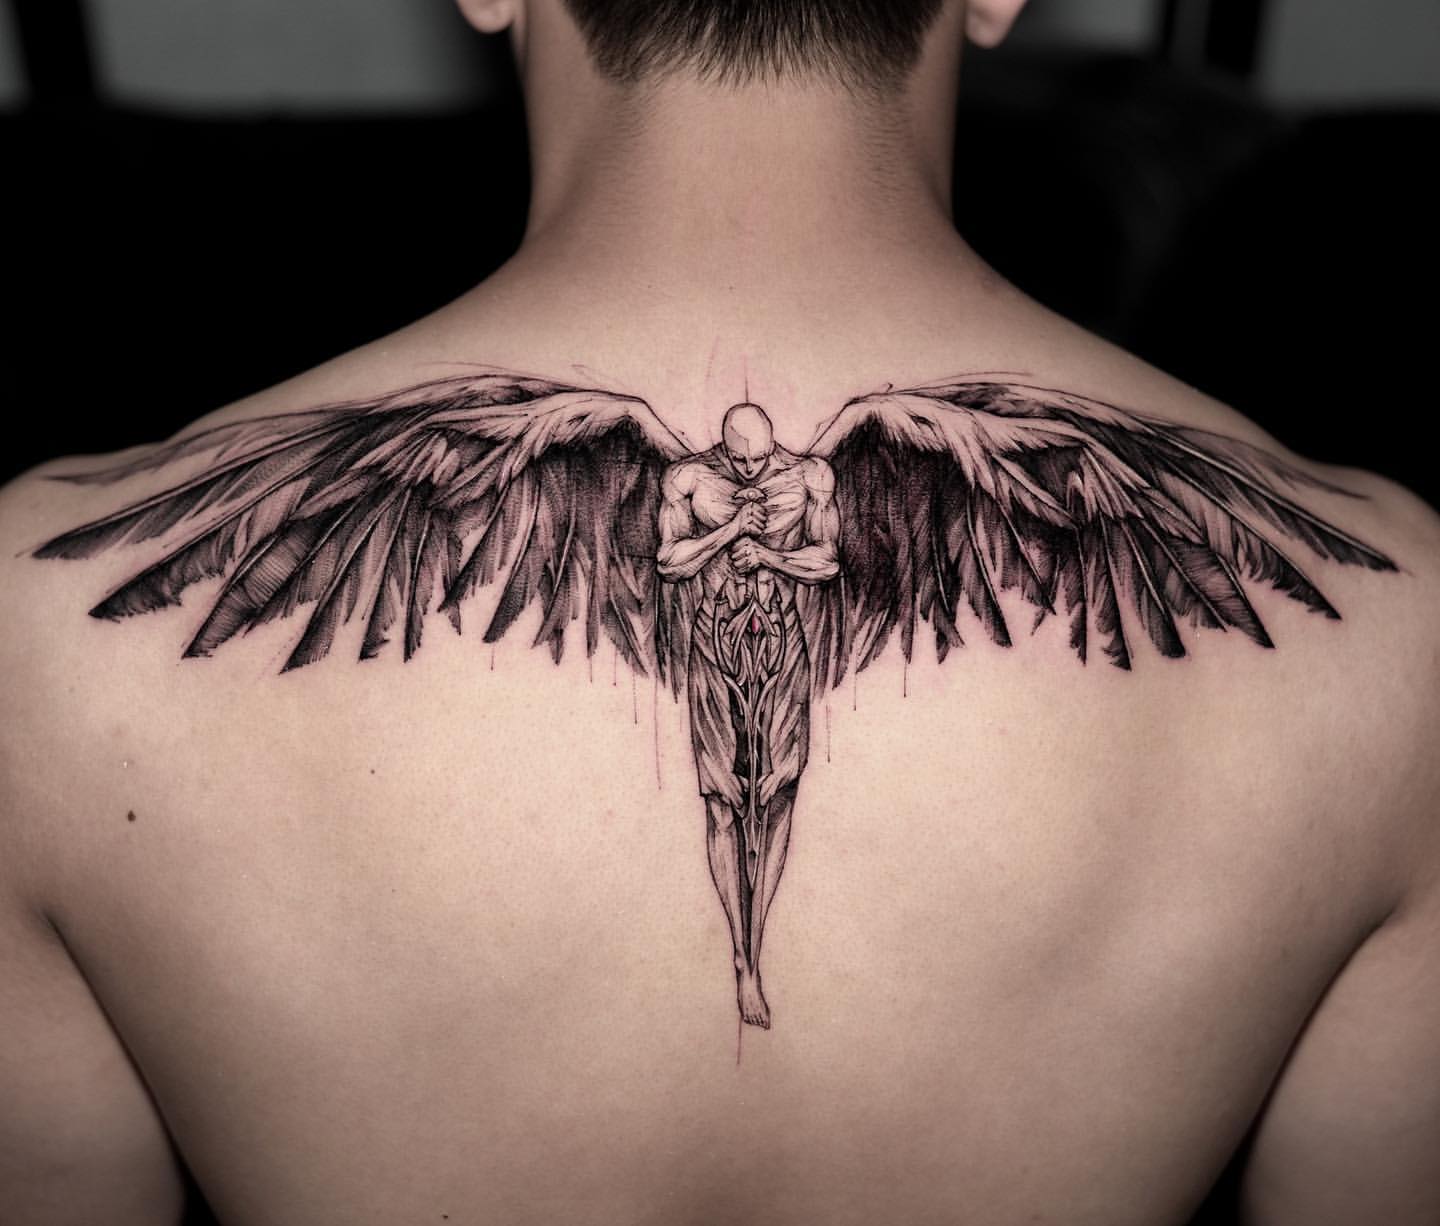 100 Best Angel Tattoos for Men and Women | Angel tattoo designs, Back  tattoos for guys, Guardian angel tattoo designs